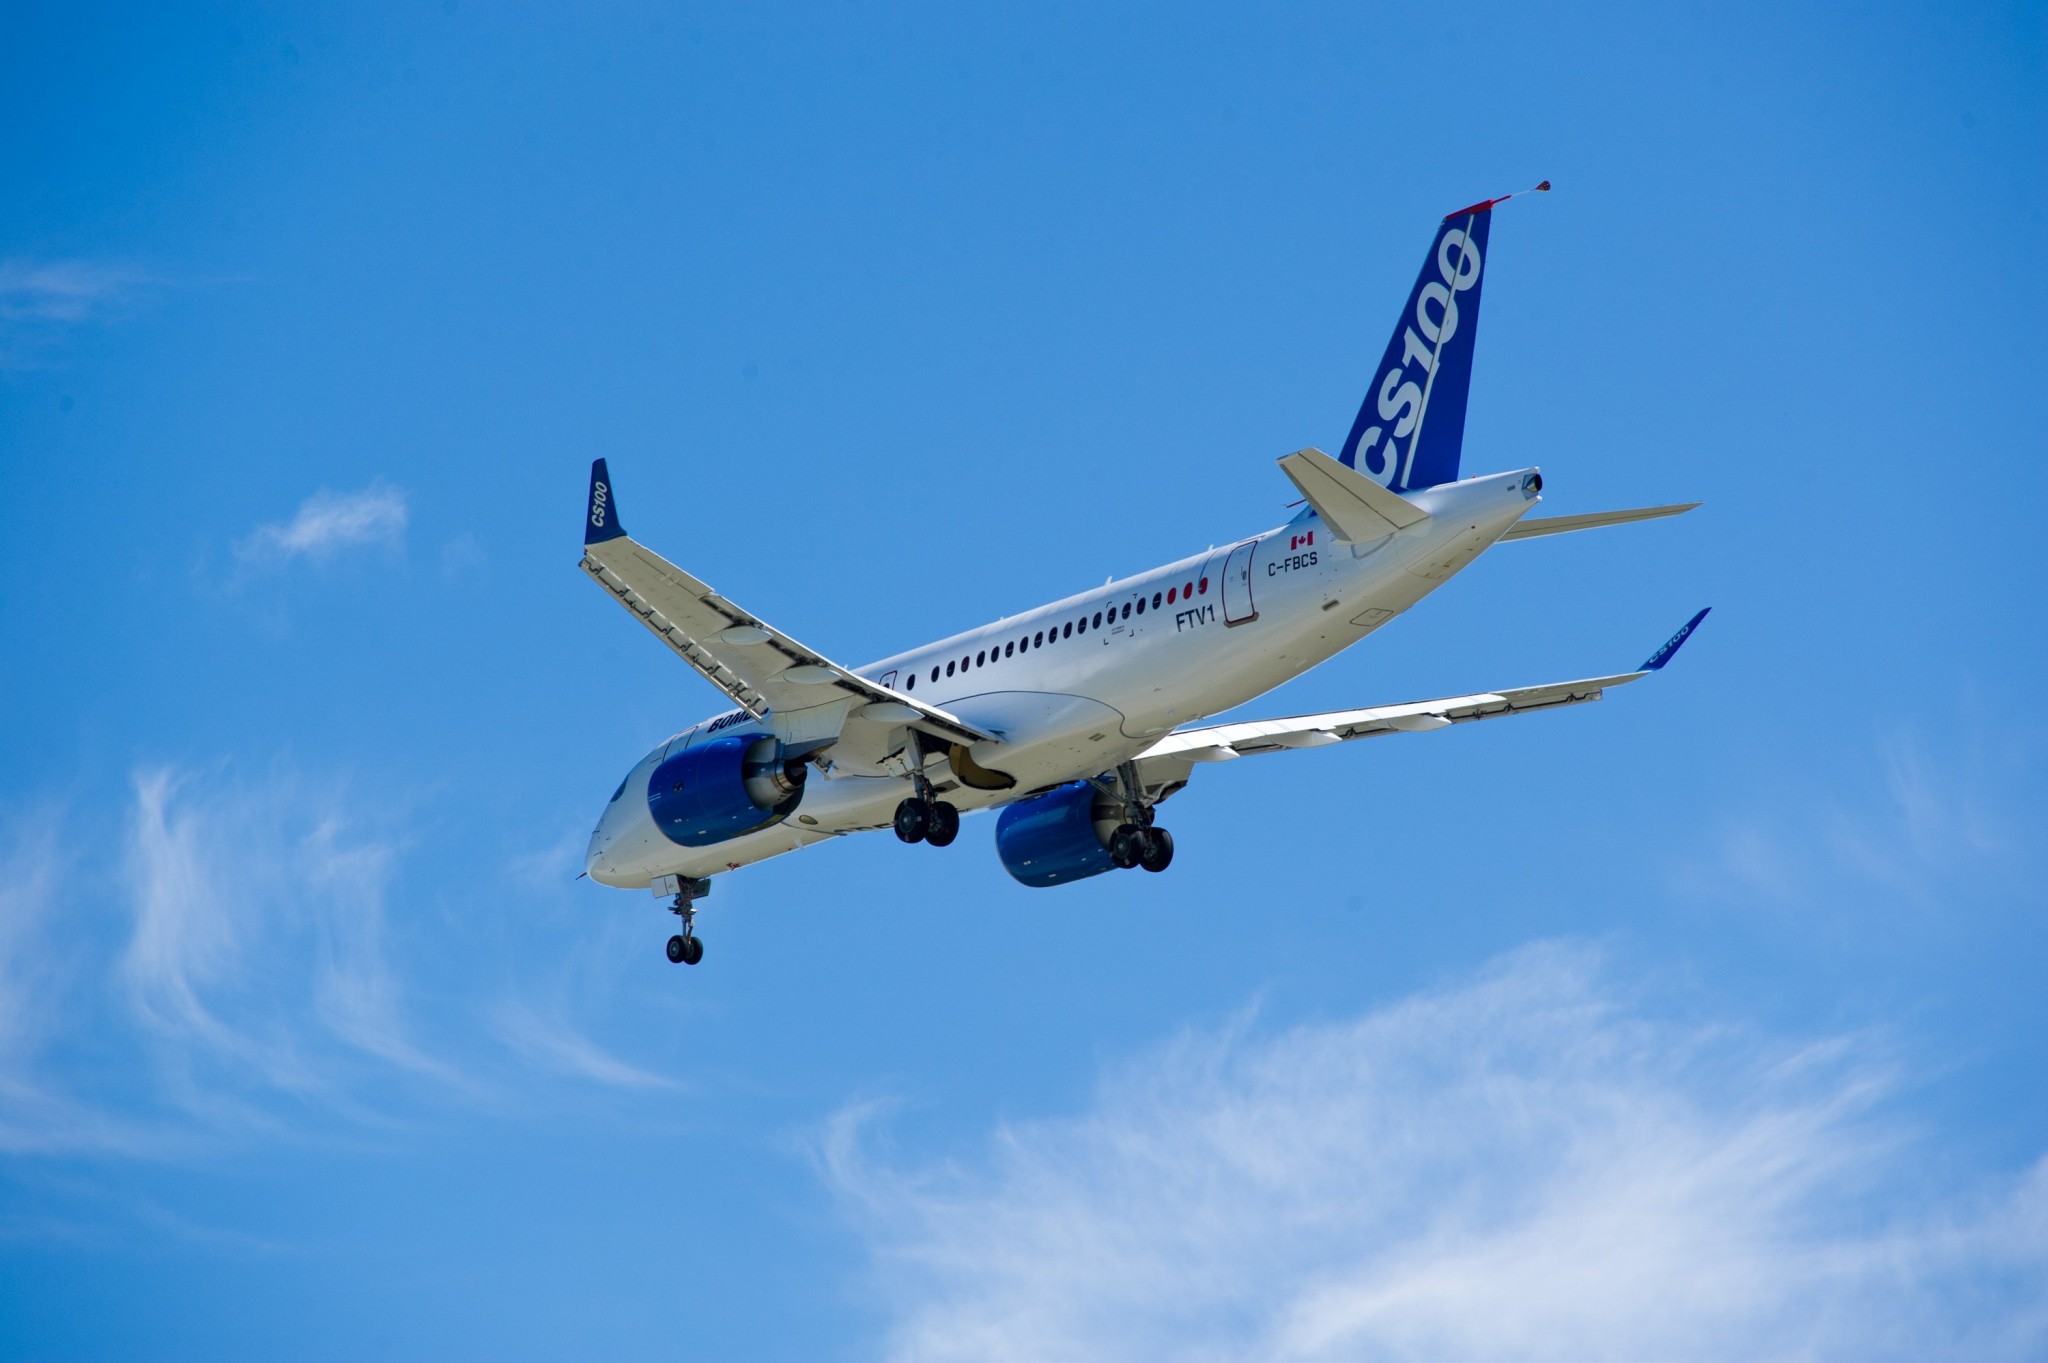 Bombardier Expects 450 new 60- to 150-seat Aircraft to Boost Middle East Regional Connectivity Over the Next 20 Years